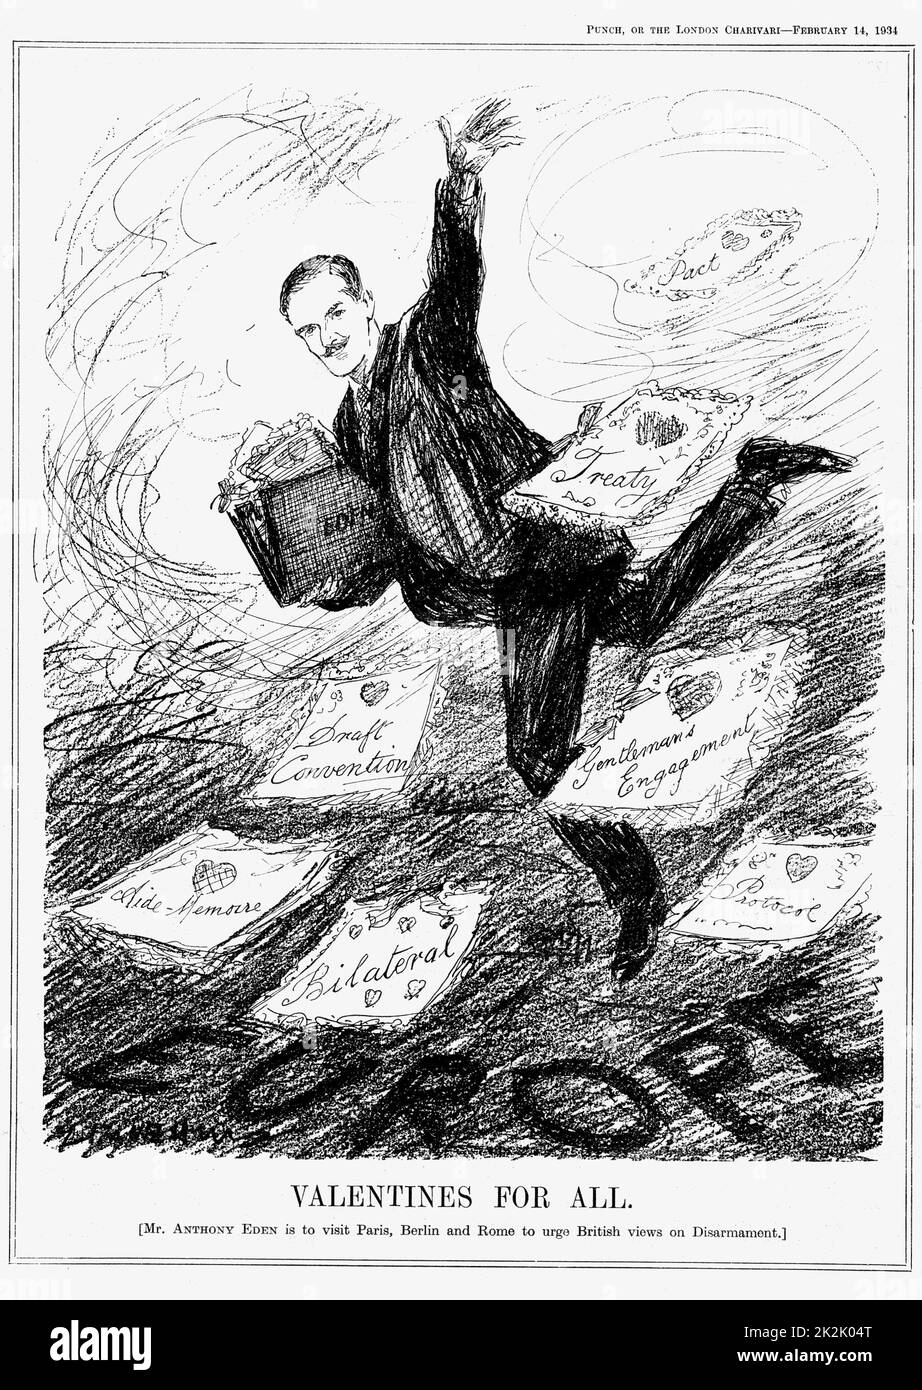 Disarmament: Anthony Eden, lst Earl of Avon (1897-1977) British Conservative statesman. Prime Minister 1955-1957. Cartoon from 'Punch', 14 February 1934,  showing Eden when Under-Secretary for Foreign Affairs visiting Paris, Berlin and Rome to discuss disarmament. Stock Photo